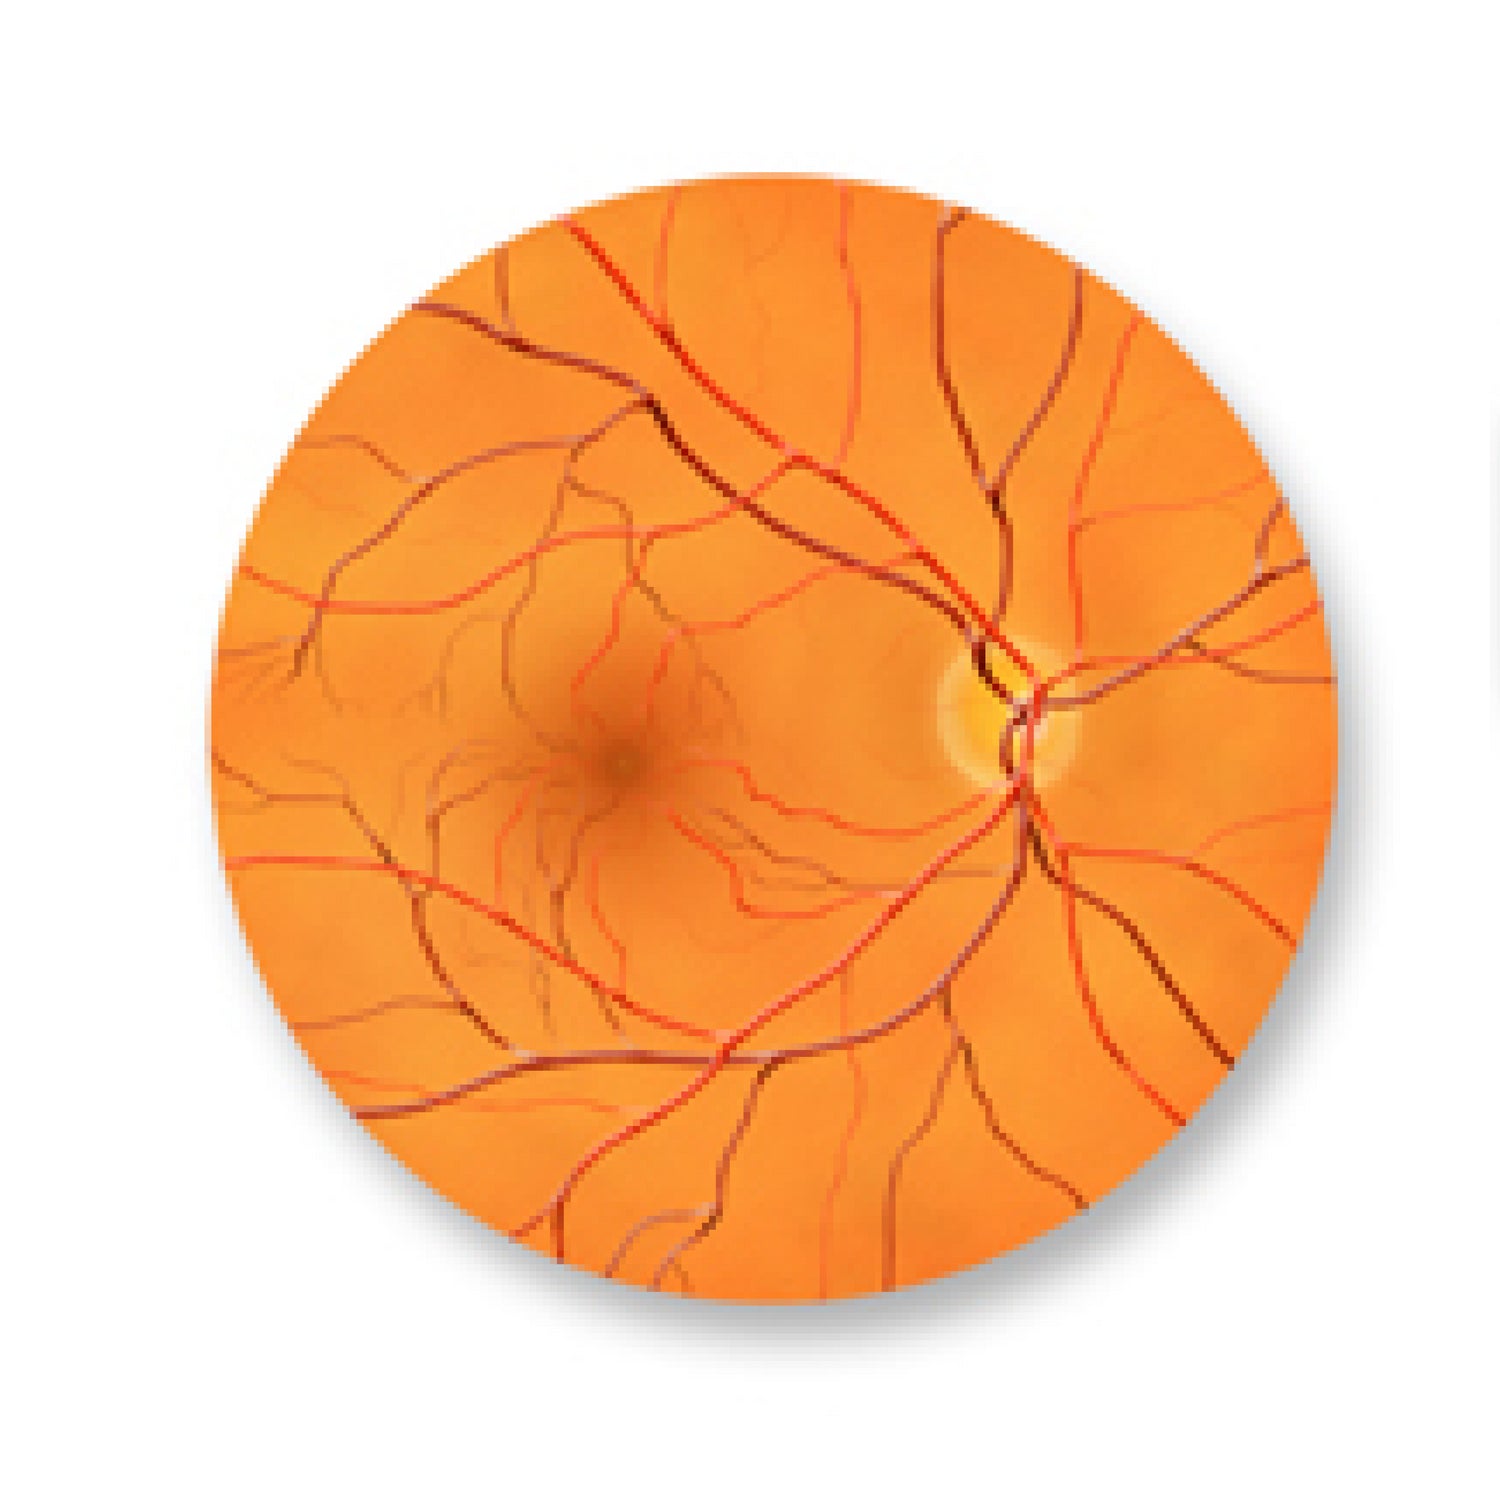 About Macular Degeneration